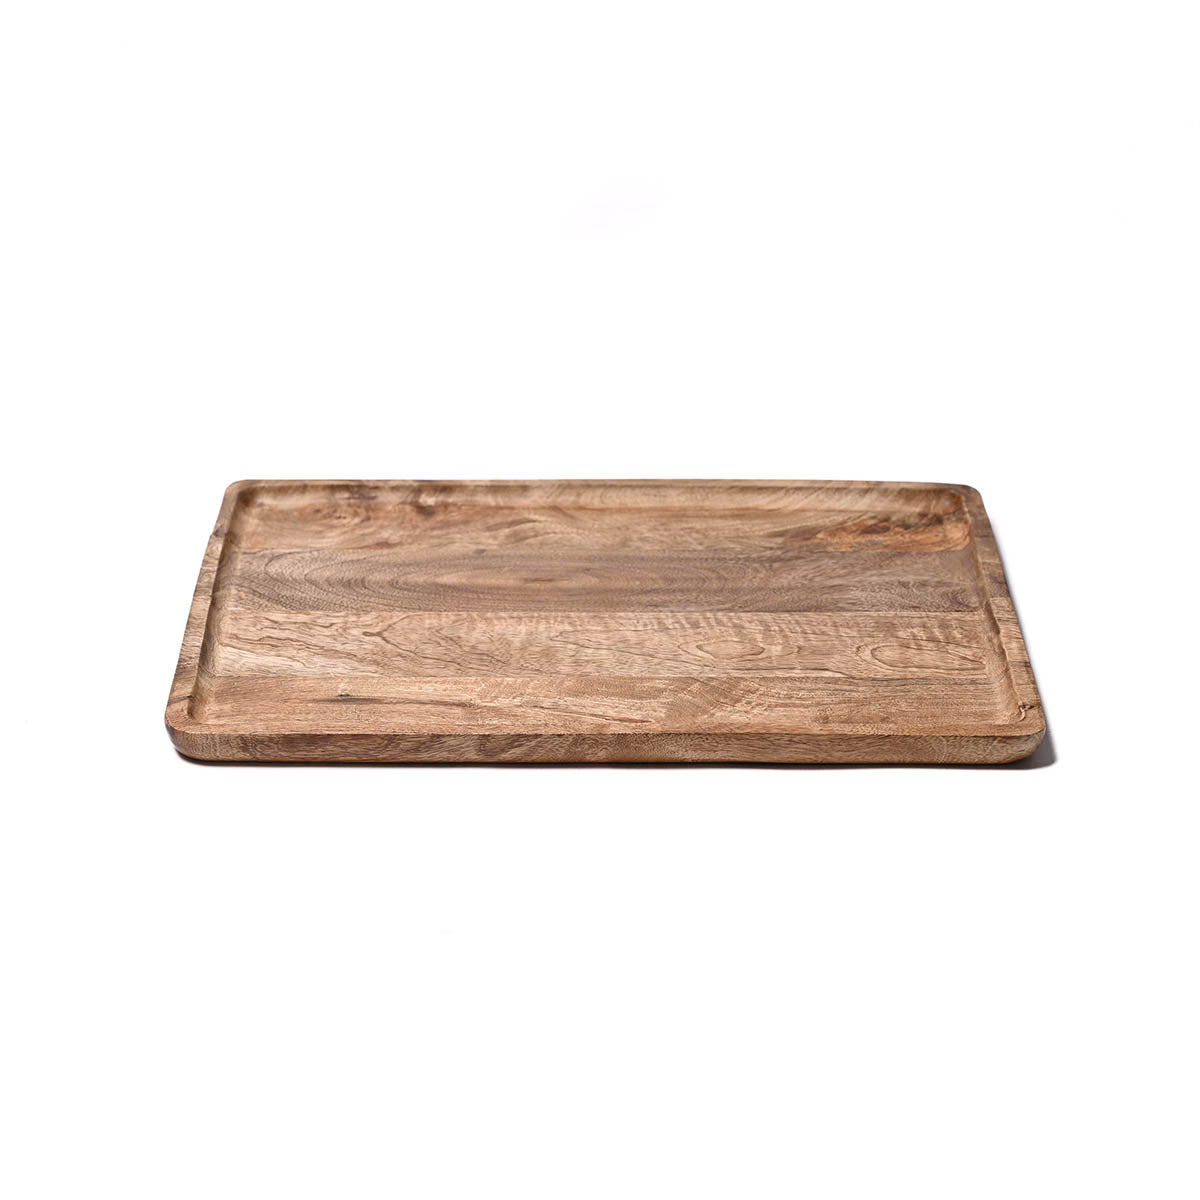 Wooden serving round edged tray rustic mango wood farmhouse decor 10X15 inches